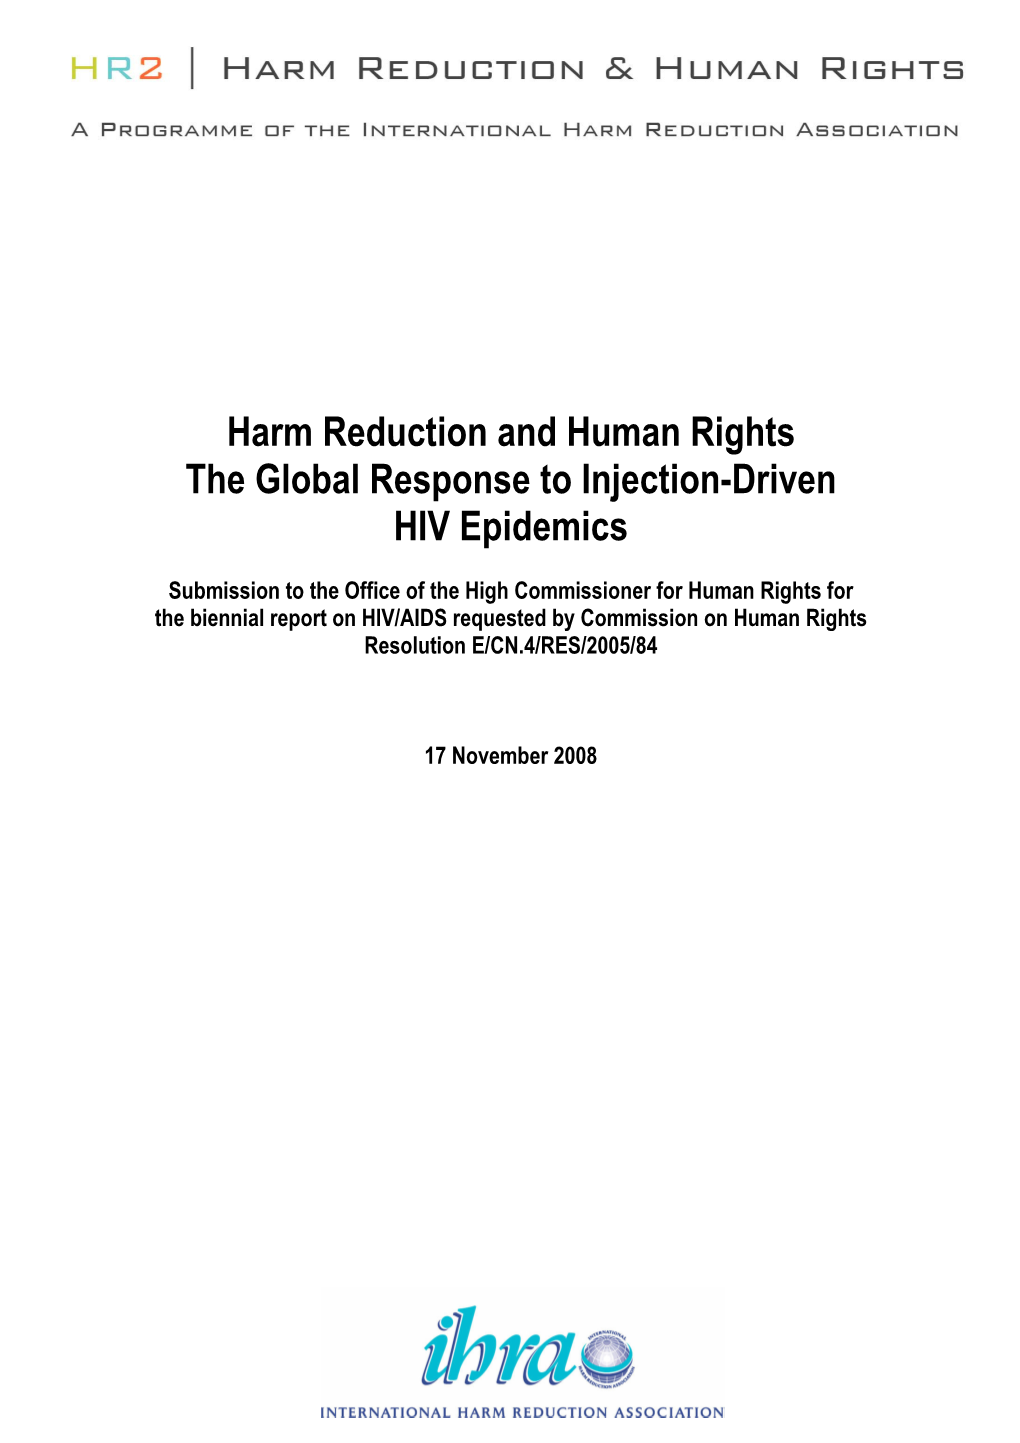 Harm Reduction and Human Rights the Global Response to Injection-Driven HIV Epidemics